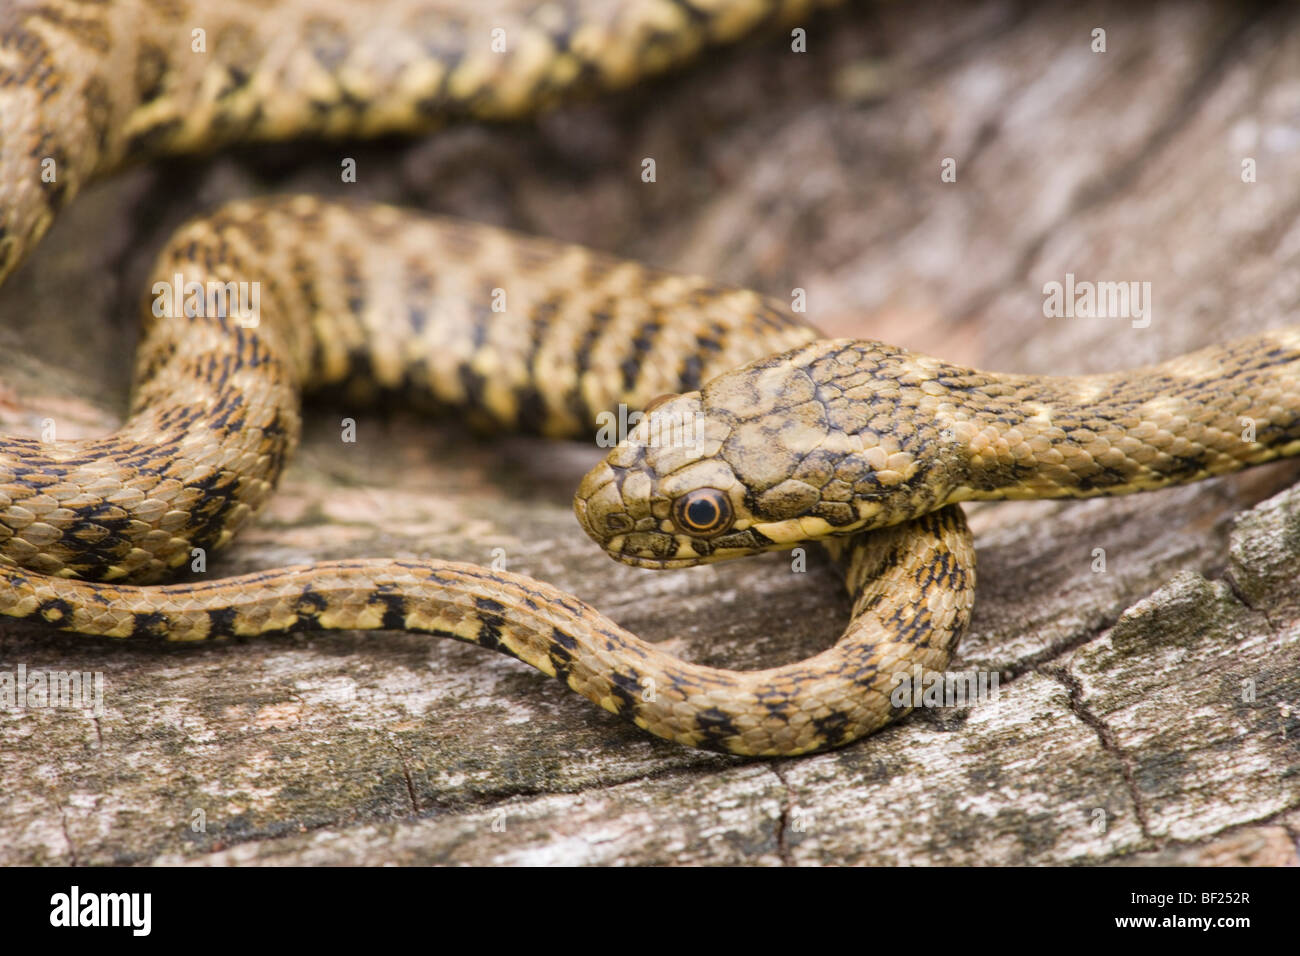 Viperine Water Snake (Natrix maura). Reminiscent of a venomous ​viper species, but harmless to people. Stock Photo